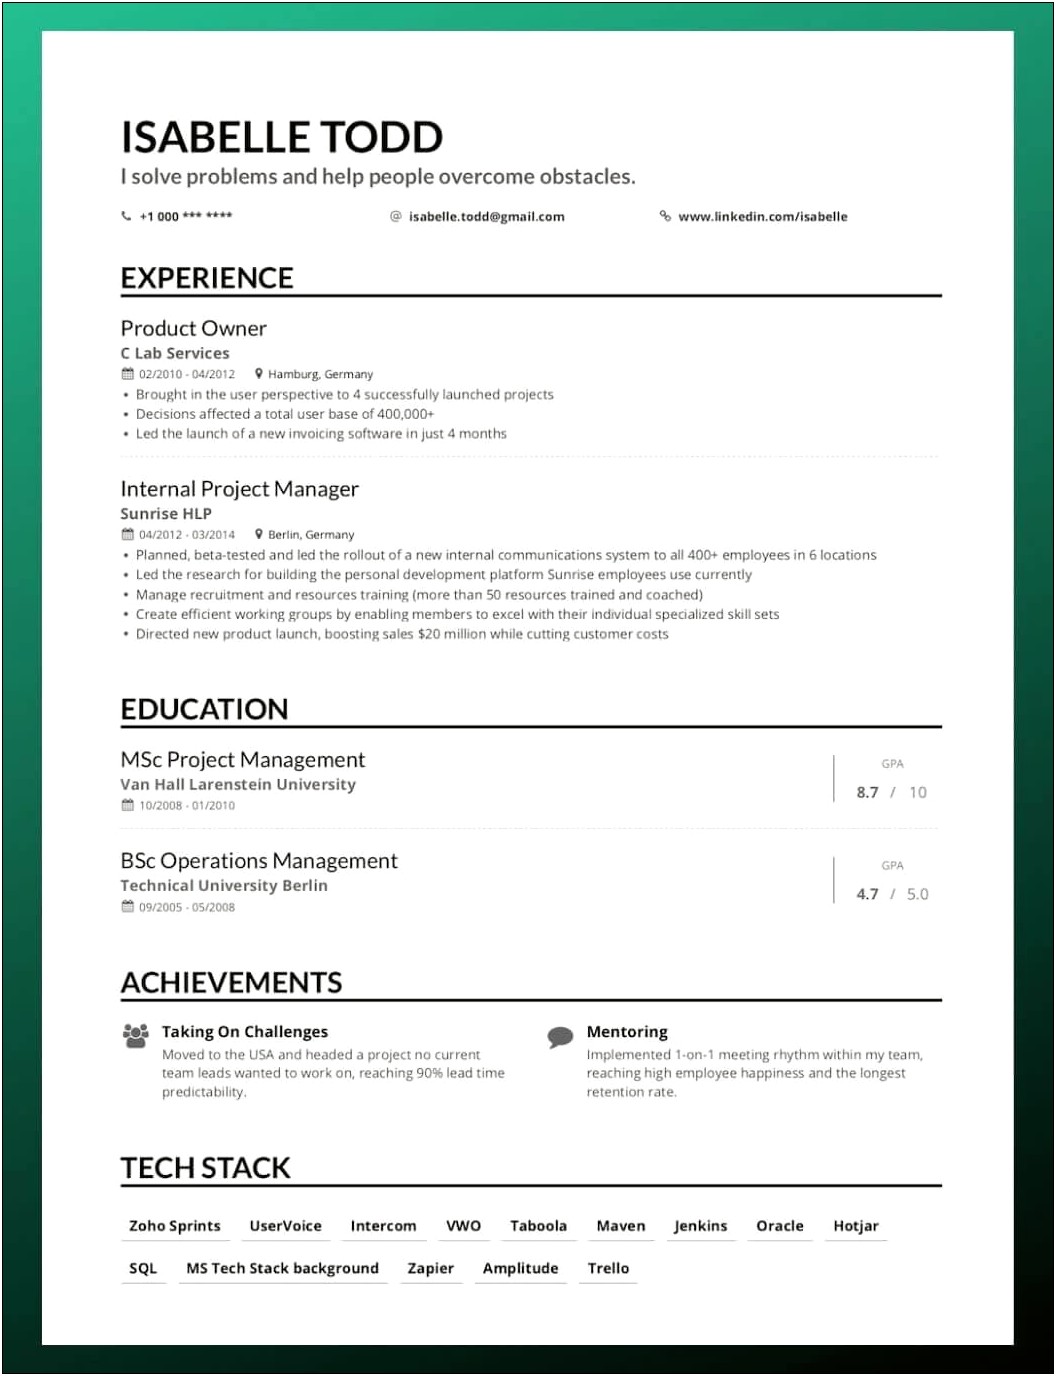 Education Or Experiance First For Resume